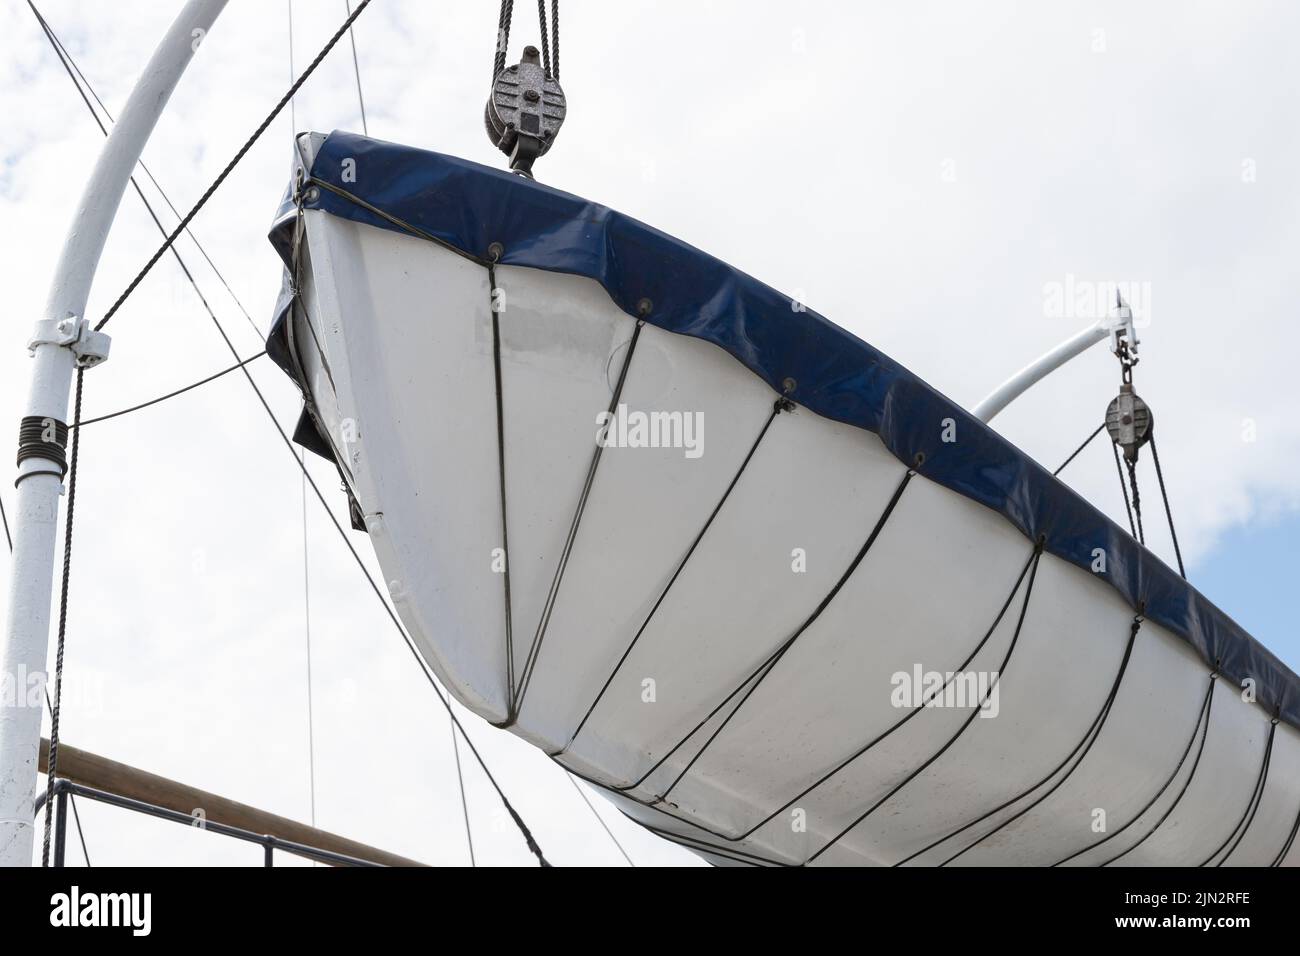 A rescue boat is on a passenger ferry above white sky background. Marine safety equipment Stock Photo